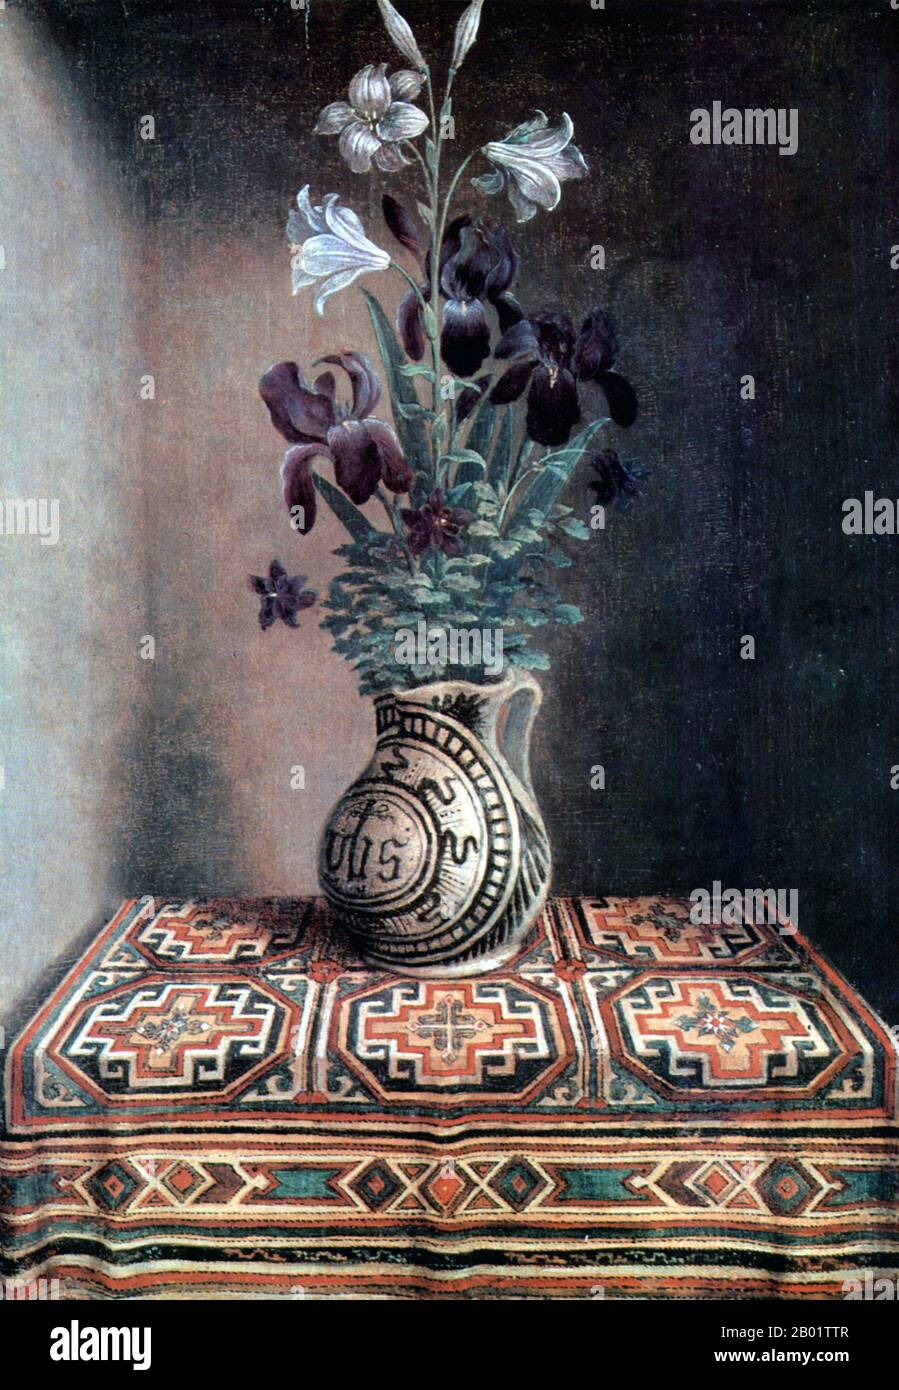 Belgium/Netherlands: 'Still Life with a Jug with Flowers'. Oil on panel painting by Hans Memling (c. 1433-1494), c. 1480.  Hans Memling/Memlinc was a German-Flemish painter from the Early Netherlandish tradition of painting. Born in the Middle Rhine, he apprenticed in the Netherlands and spent time in Brussels. In 1465 he became a citizen of Bruges, becoming one of the leading artists and master of a large workshop. He became one of the city's wealthiest citizens. Stock Photo